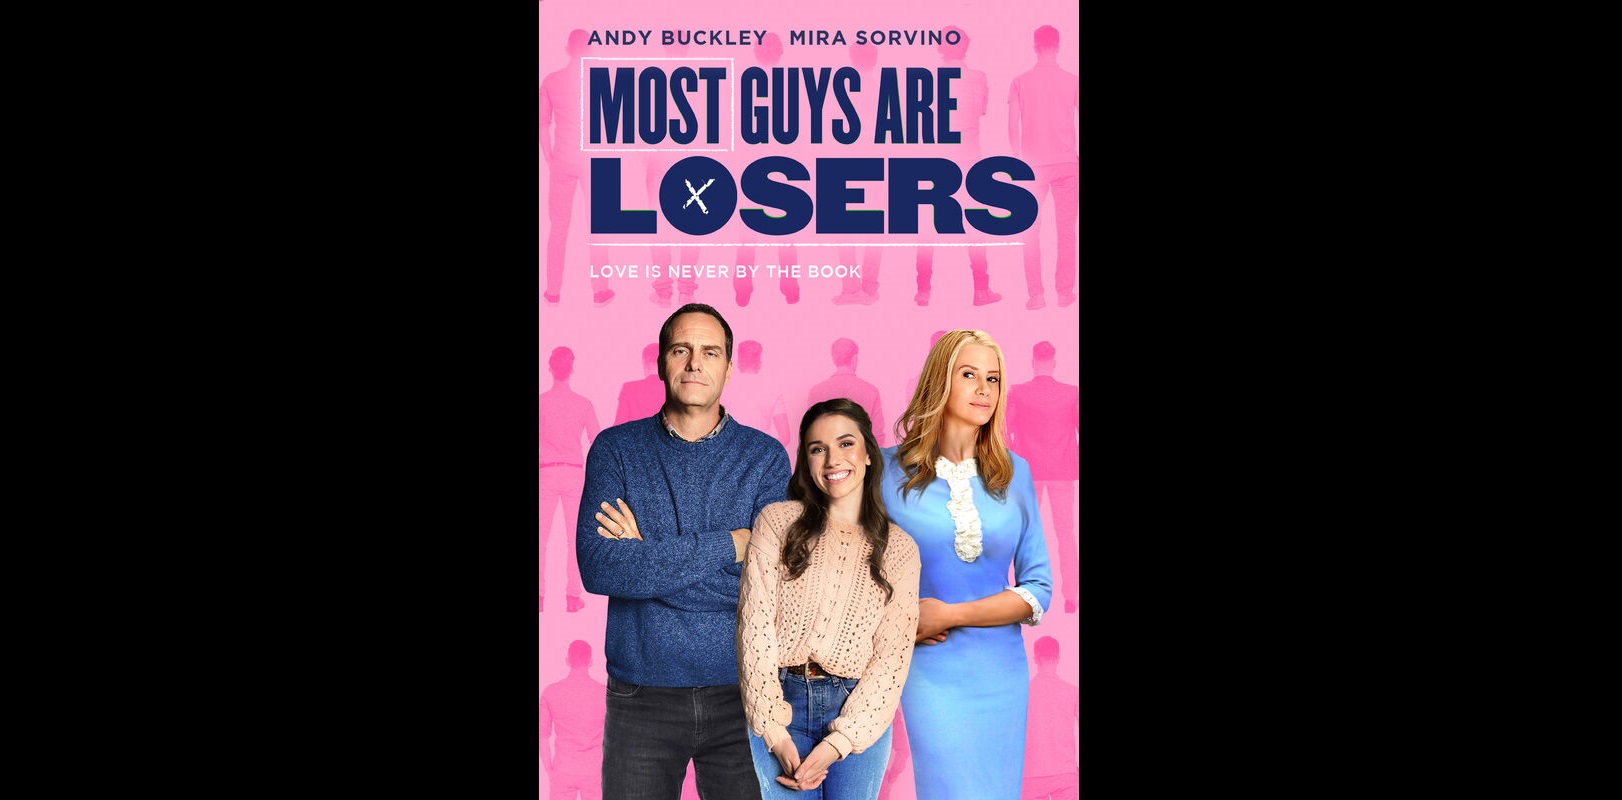 most guys are losers poster